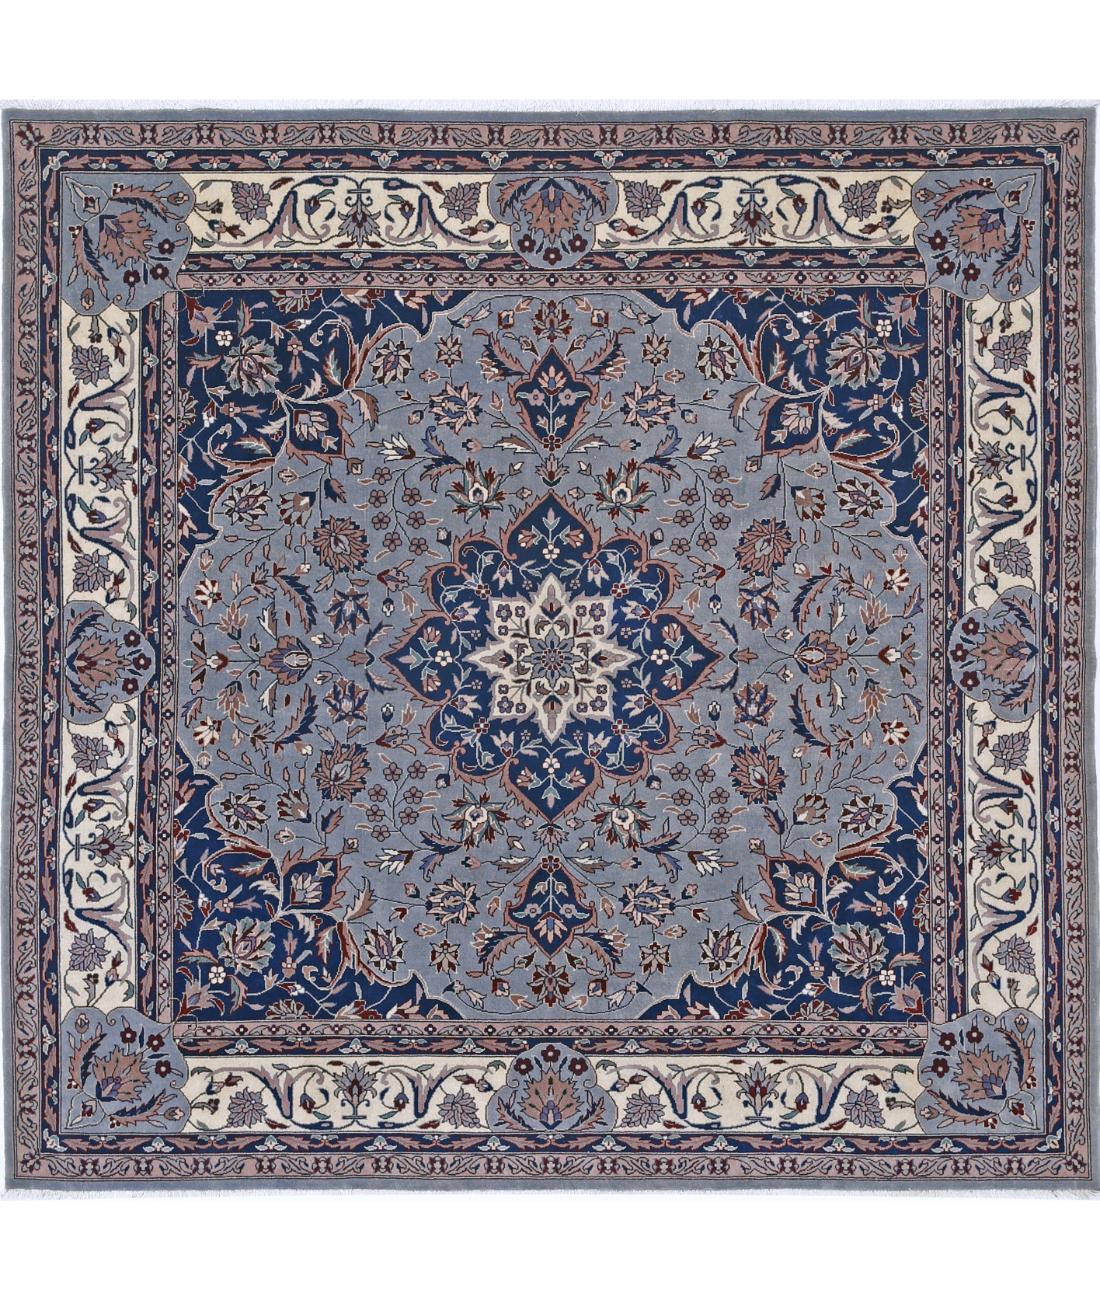 Heritage 6' 7" X 6' 10" Hand-Knotted Wool Rug 6' 7" X 6' 10" (201 X 208) / Blue / Ivory